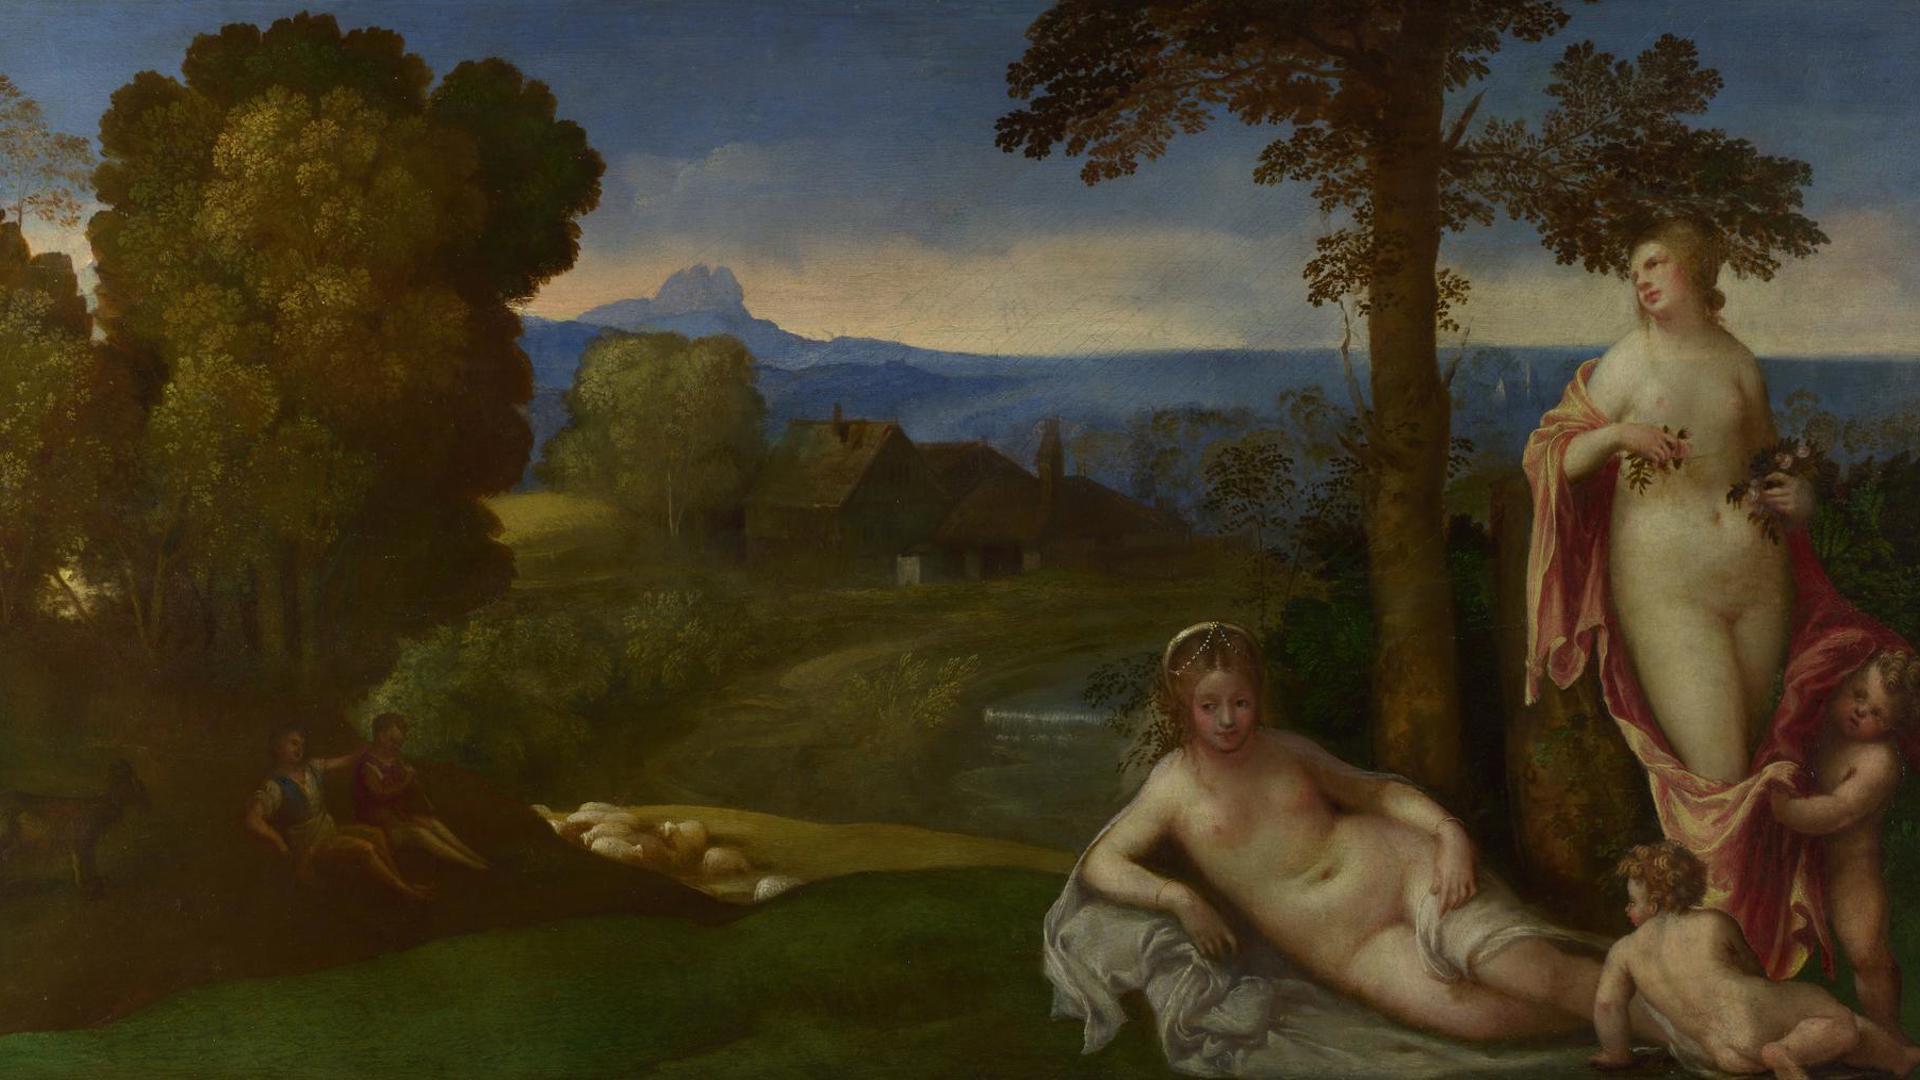 Nymphs and Children in a Landscape with Shepherds by Imitator of Giorgione